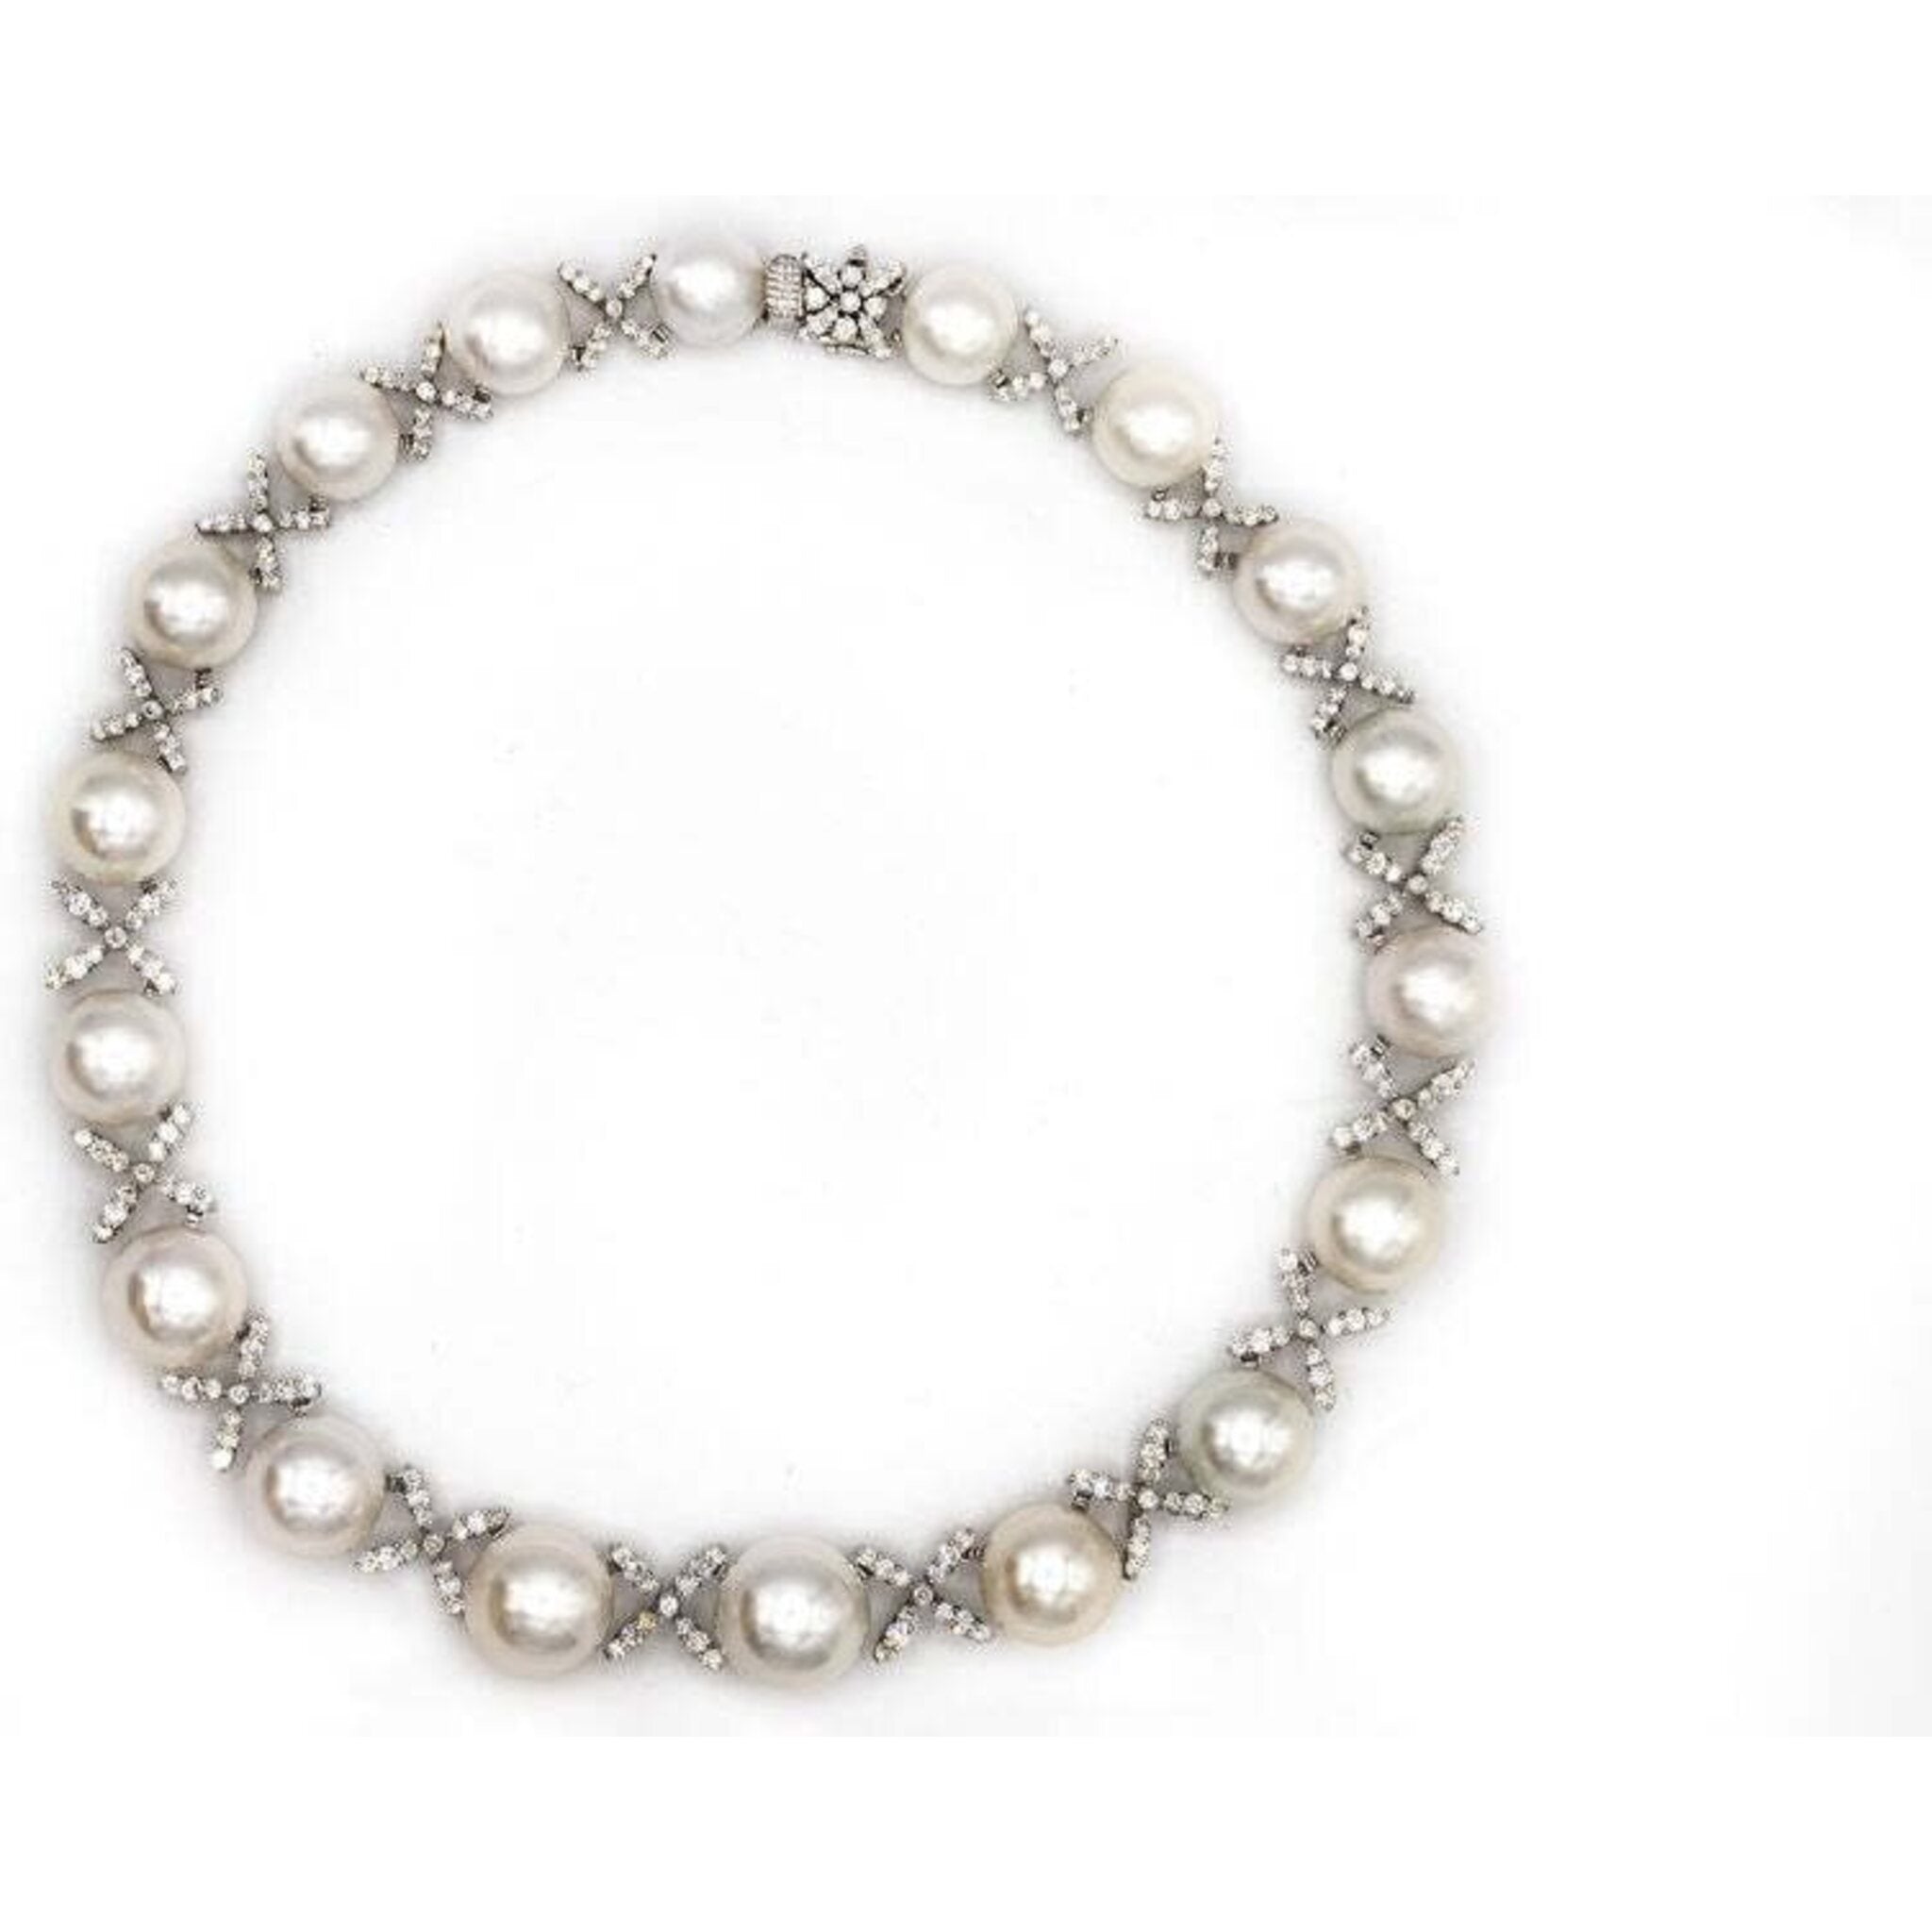 18K White Gold Diamonds & South Sea Pearls Necklace